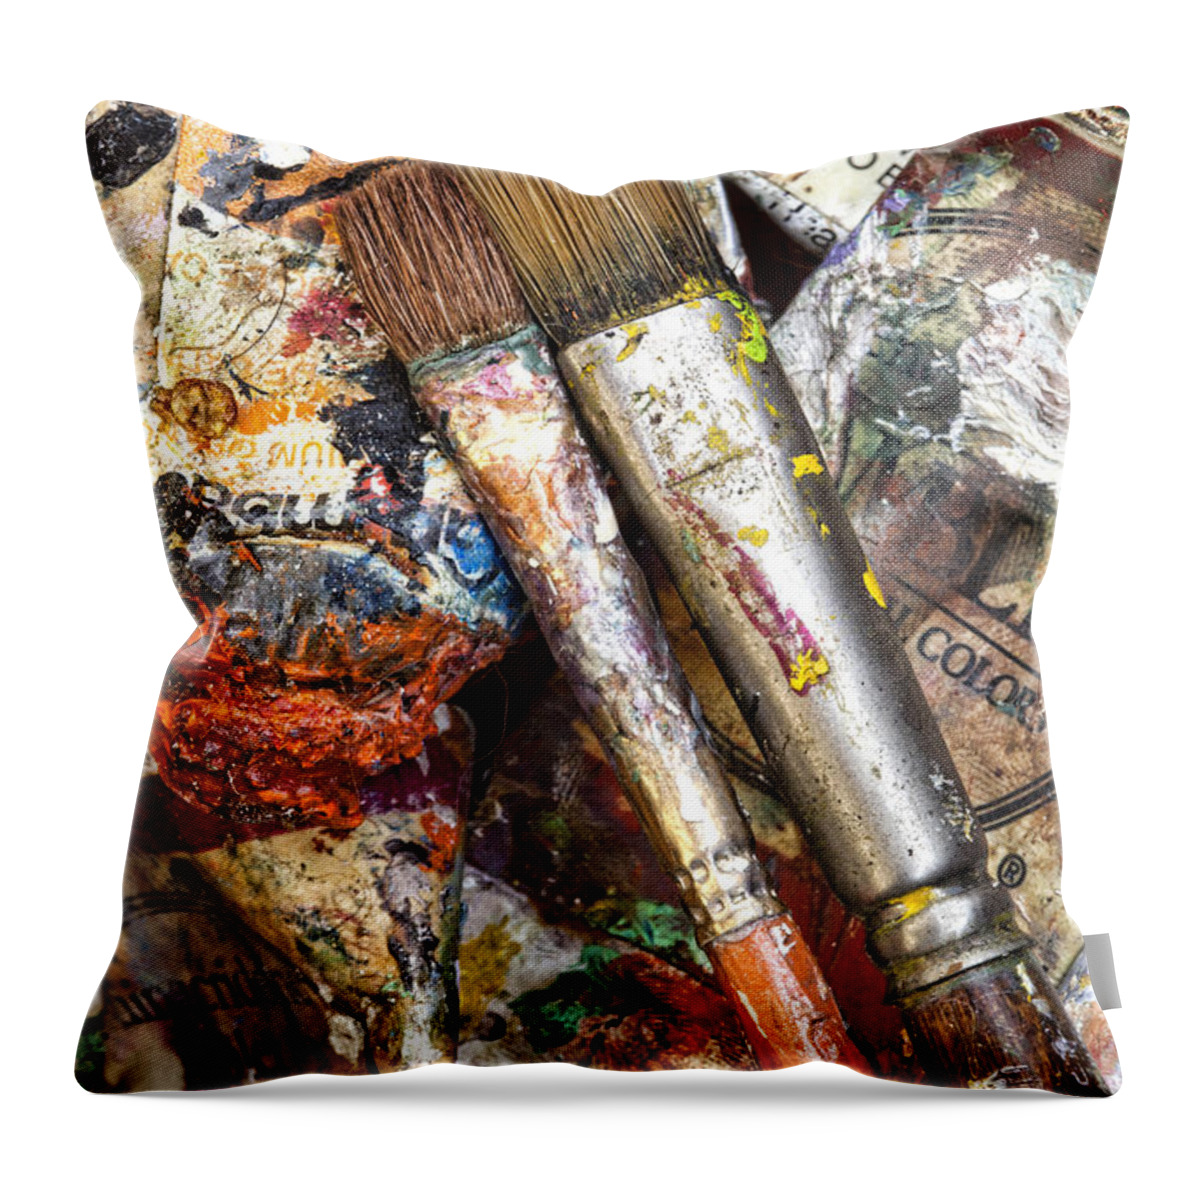 Art Throw Pillow featuring the photograph Art Is Messy 2 by Carol Leigh